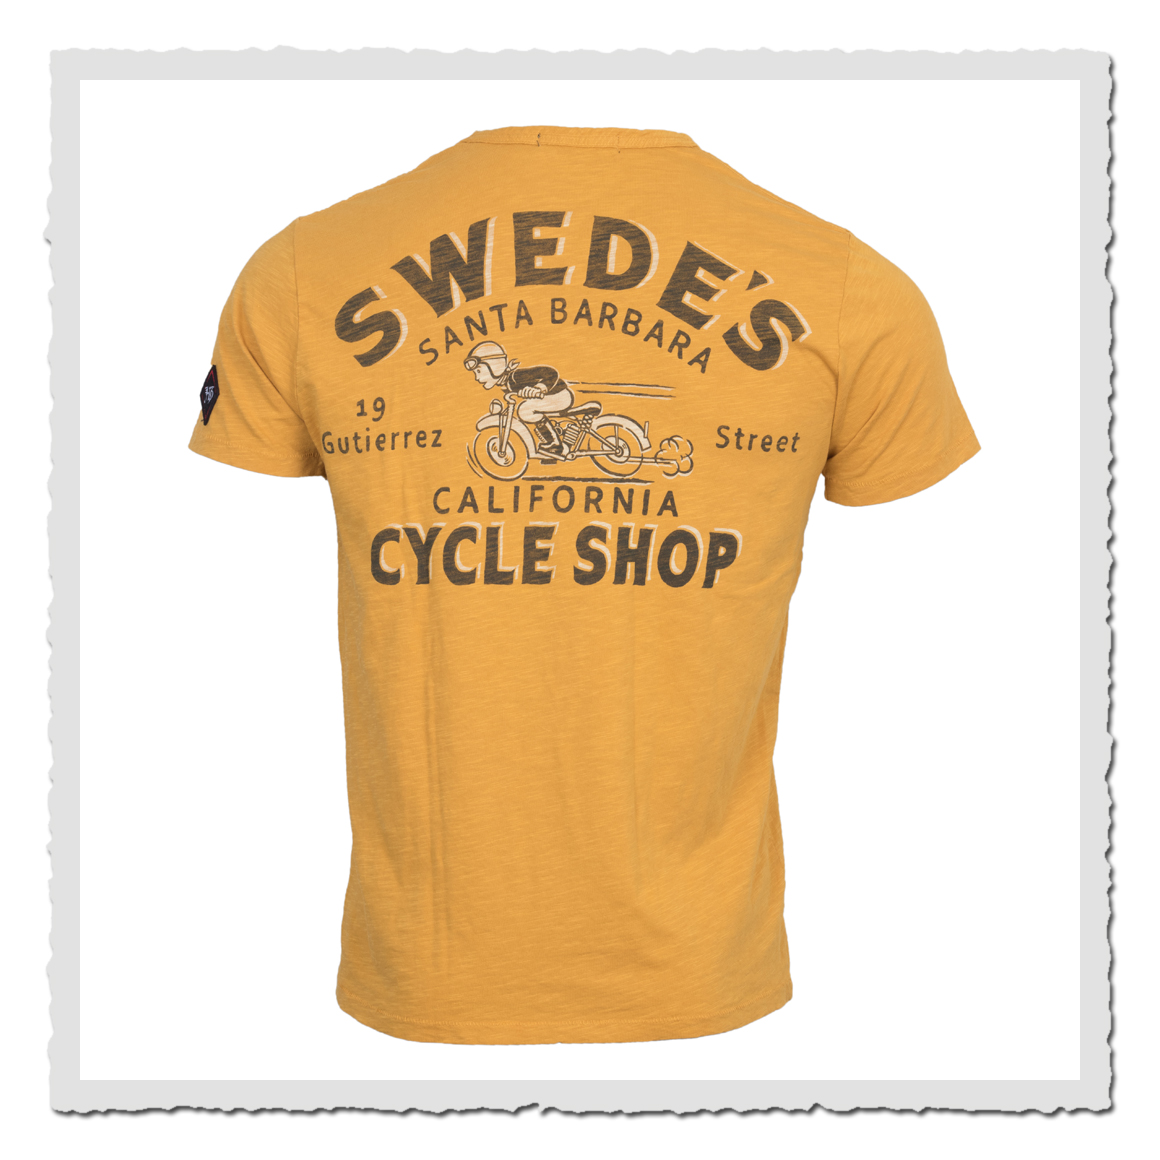 Swedes Cycle Shop yellow